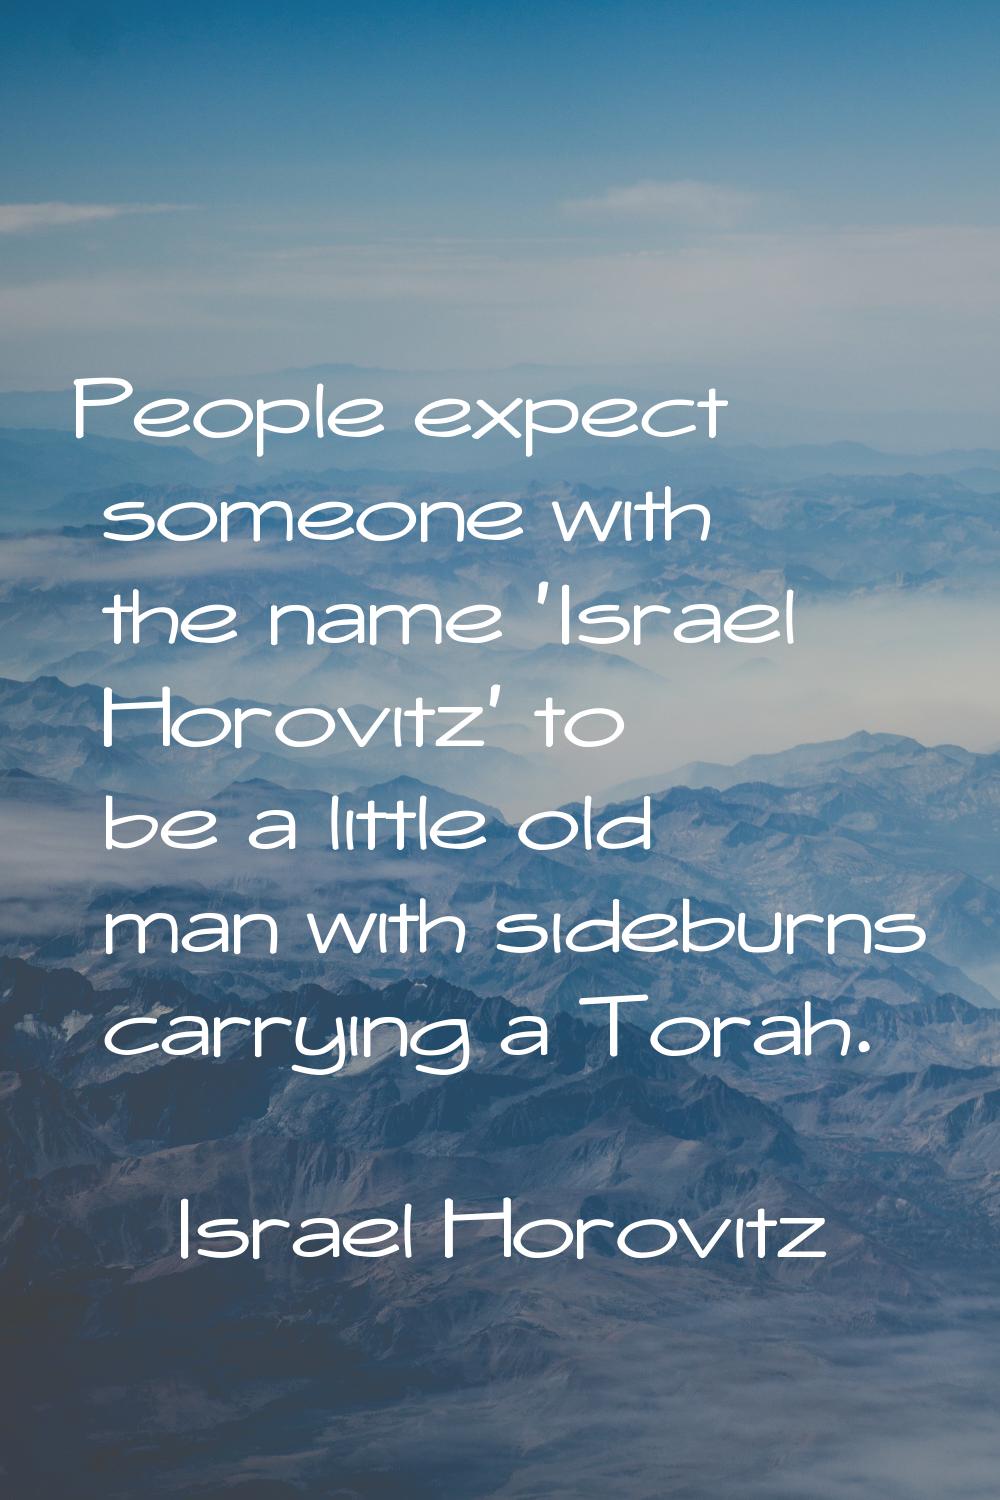 People expect someone with the name 'Israel Horovitz' to be a little old man with sideburns carryin